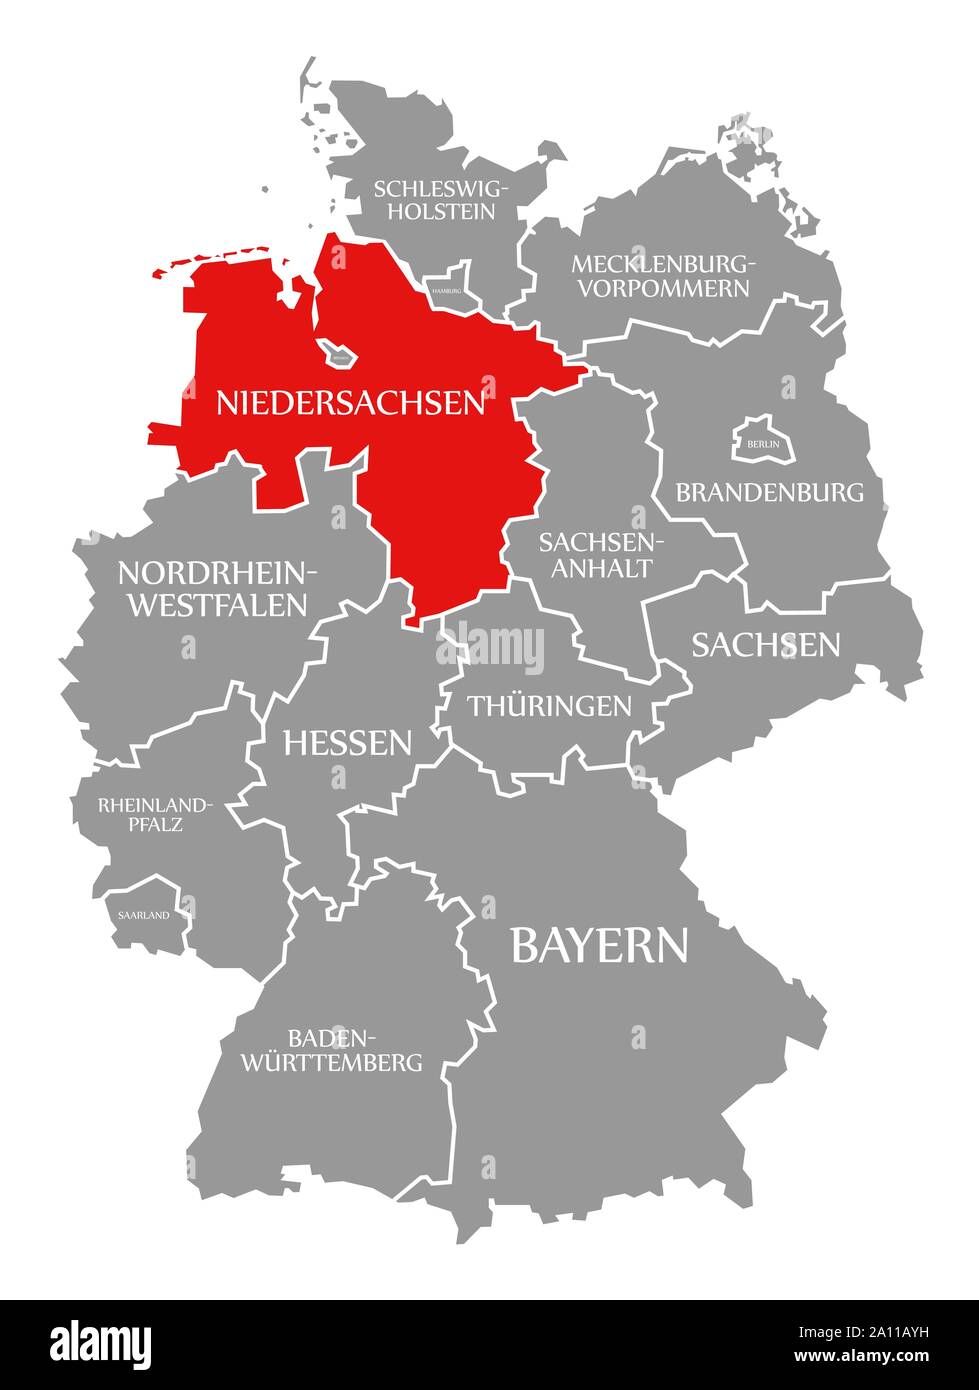 Lower Saxony red highlighted in map of Germany Stock Photo